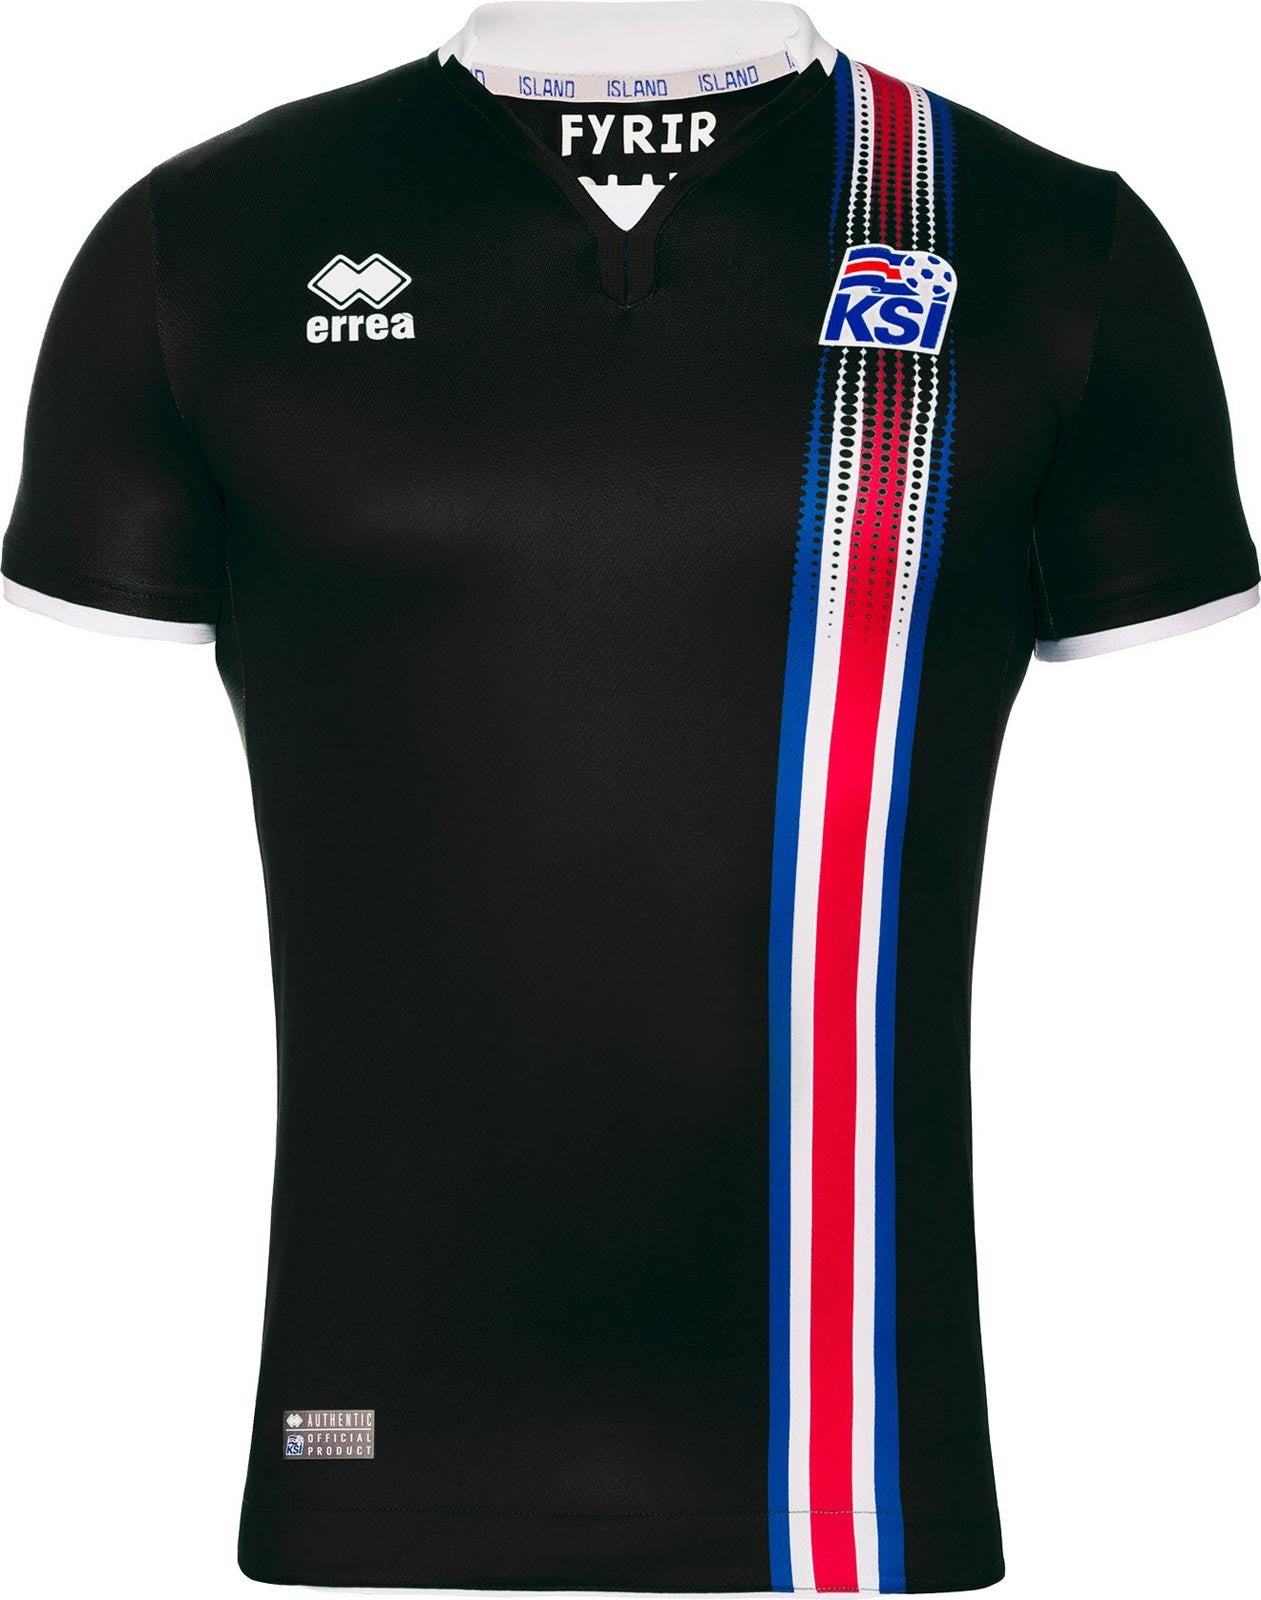 Iceland men's national team Olympic gear